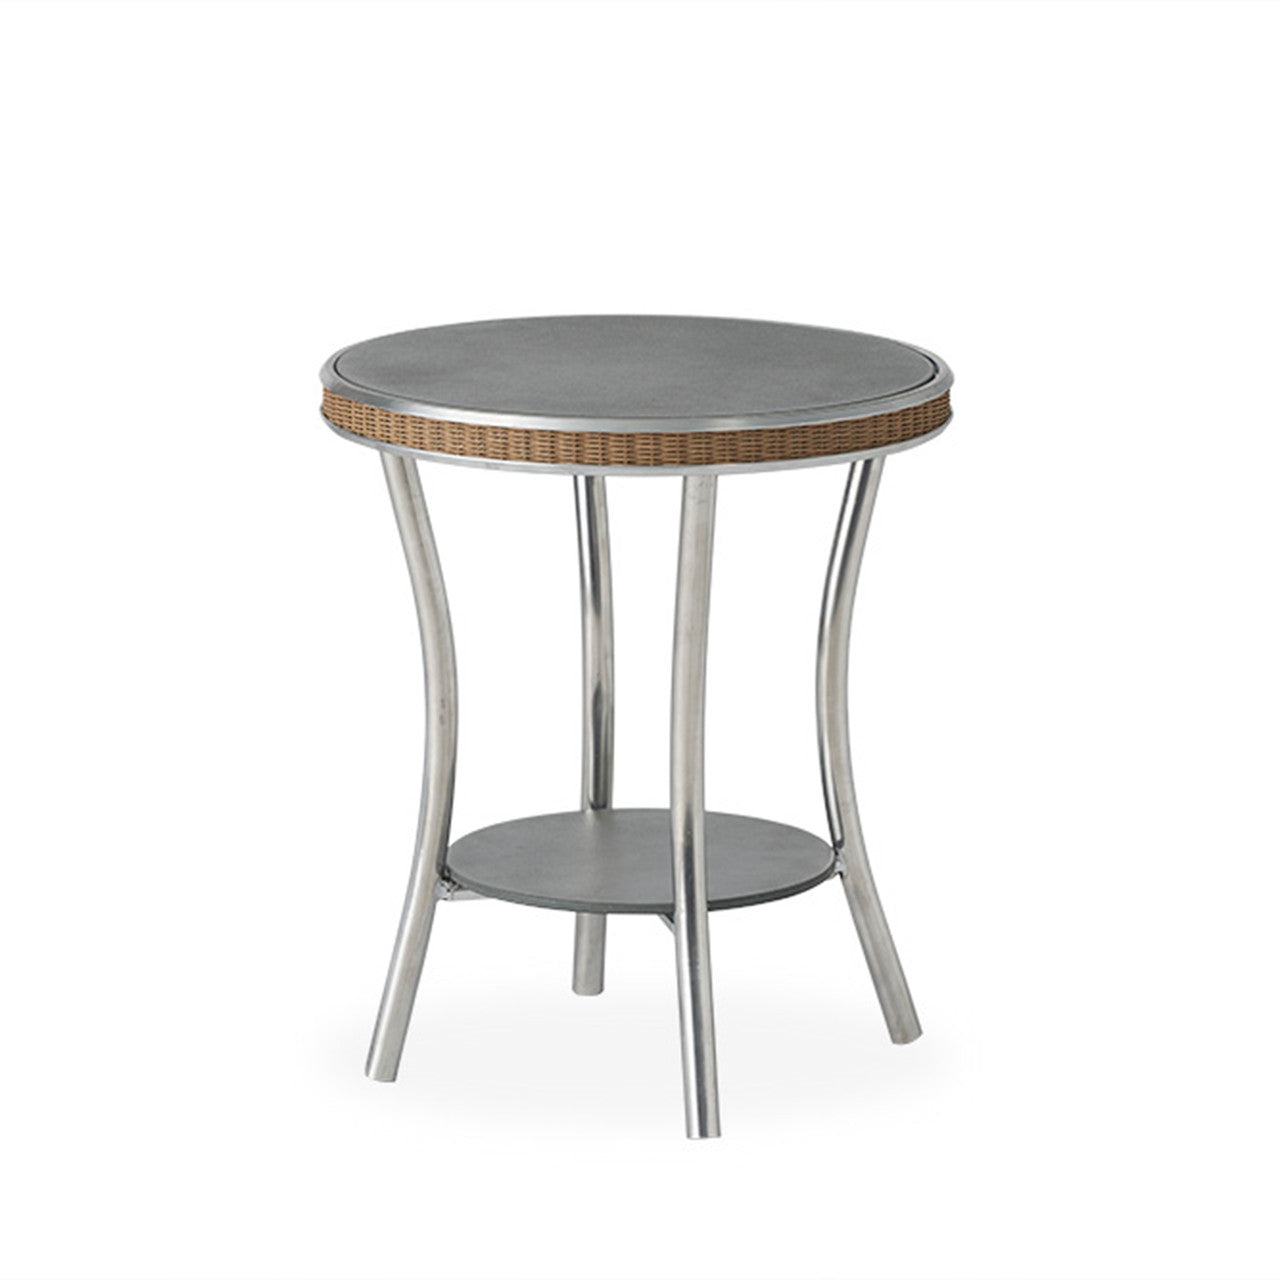 Lloyd Flanders Essence 20" Round End Table with Charcoal Glass